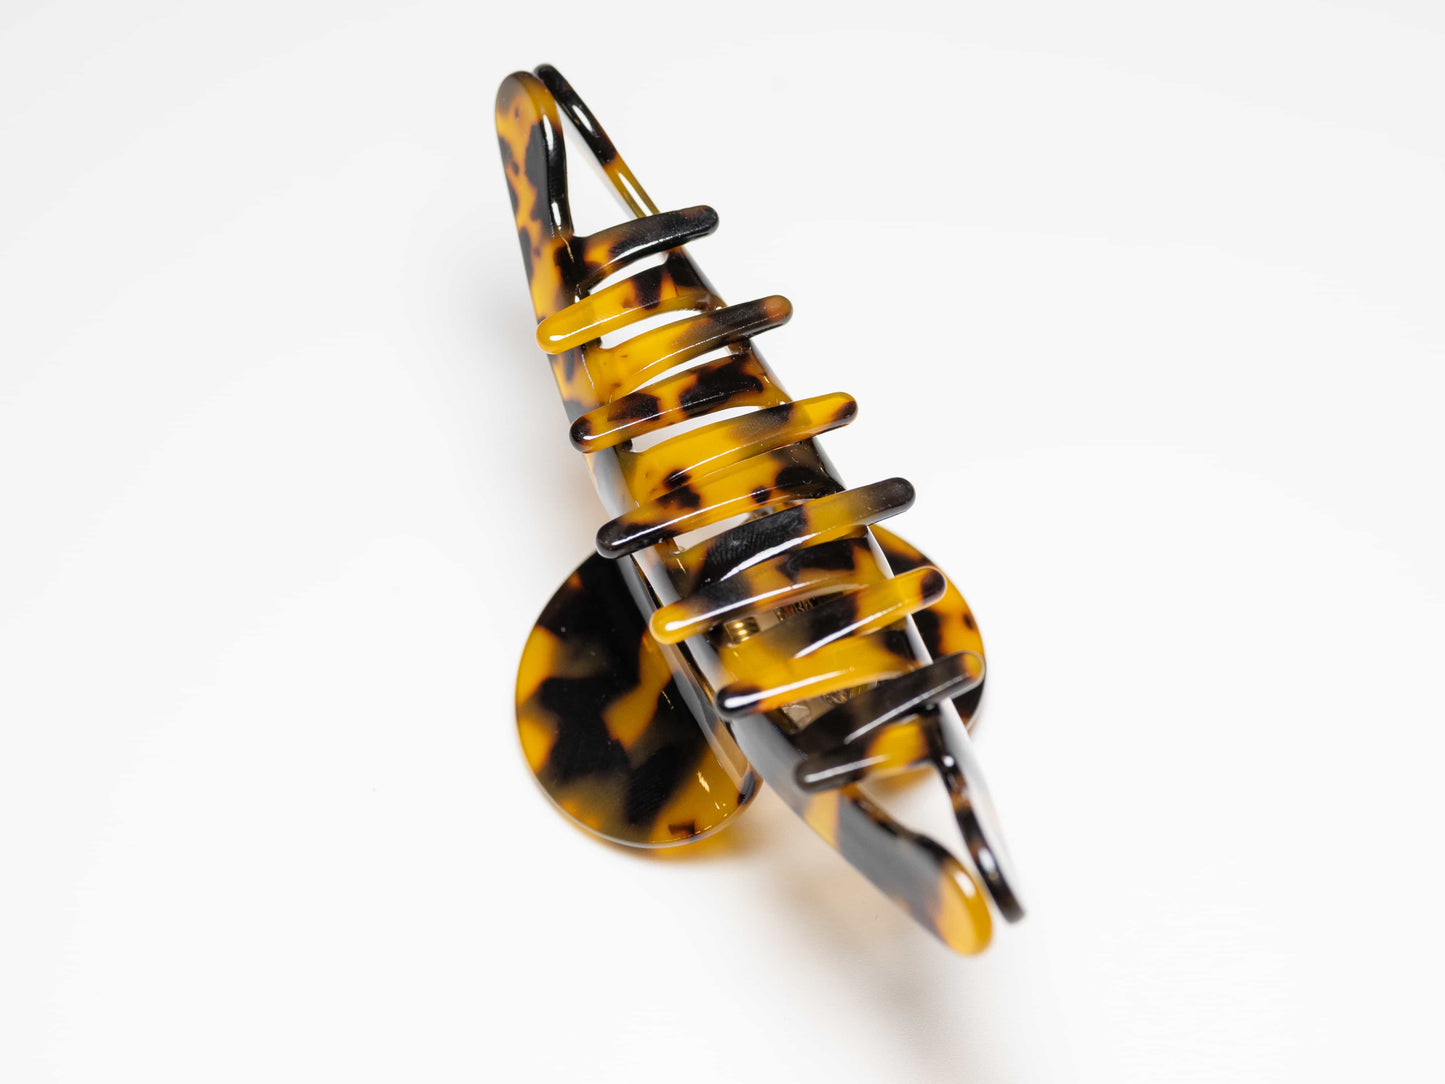 Leopard Charm and Durability: New Acetate Hair Claws for Fashionable Women